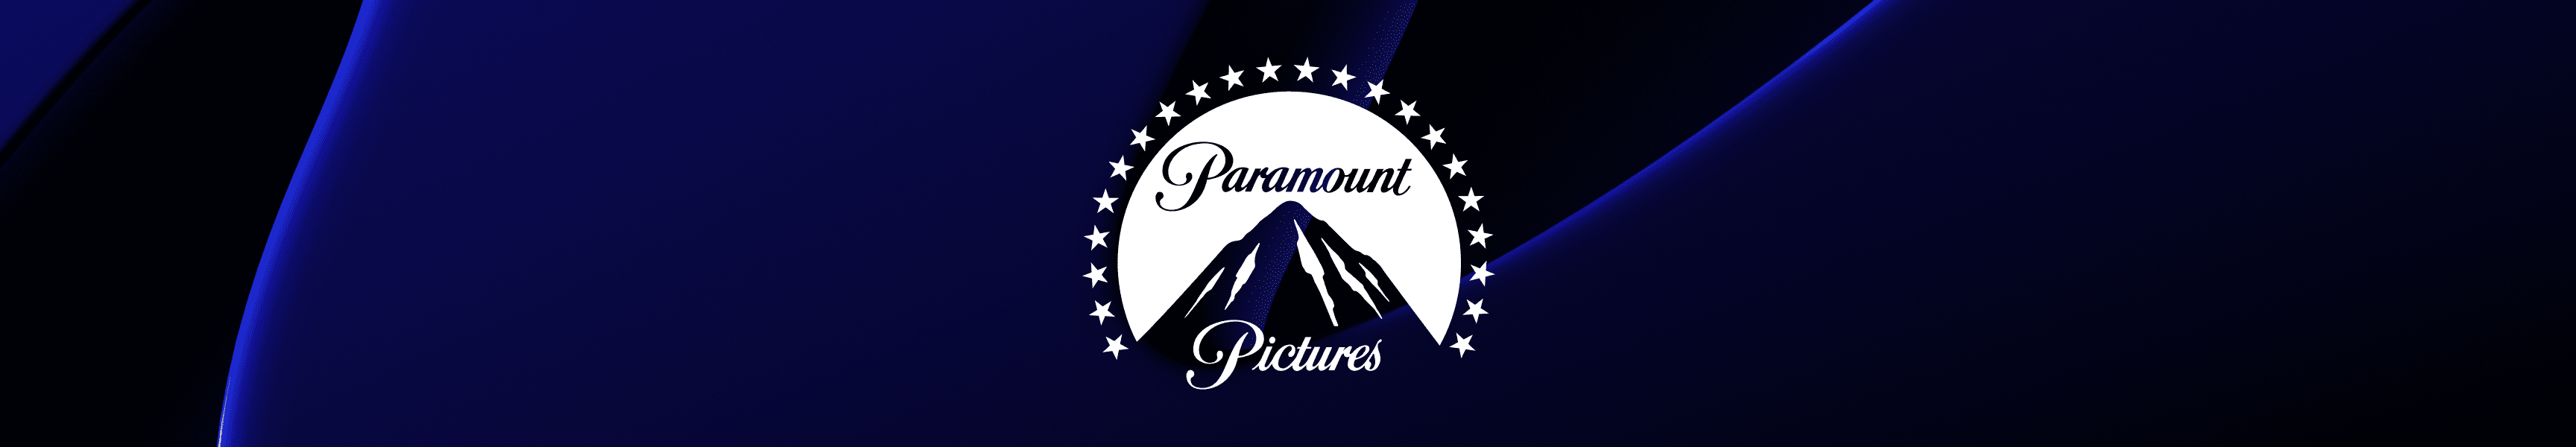 Paramount Pictures Art mural